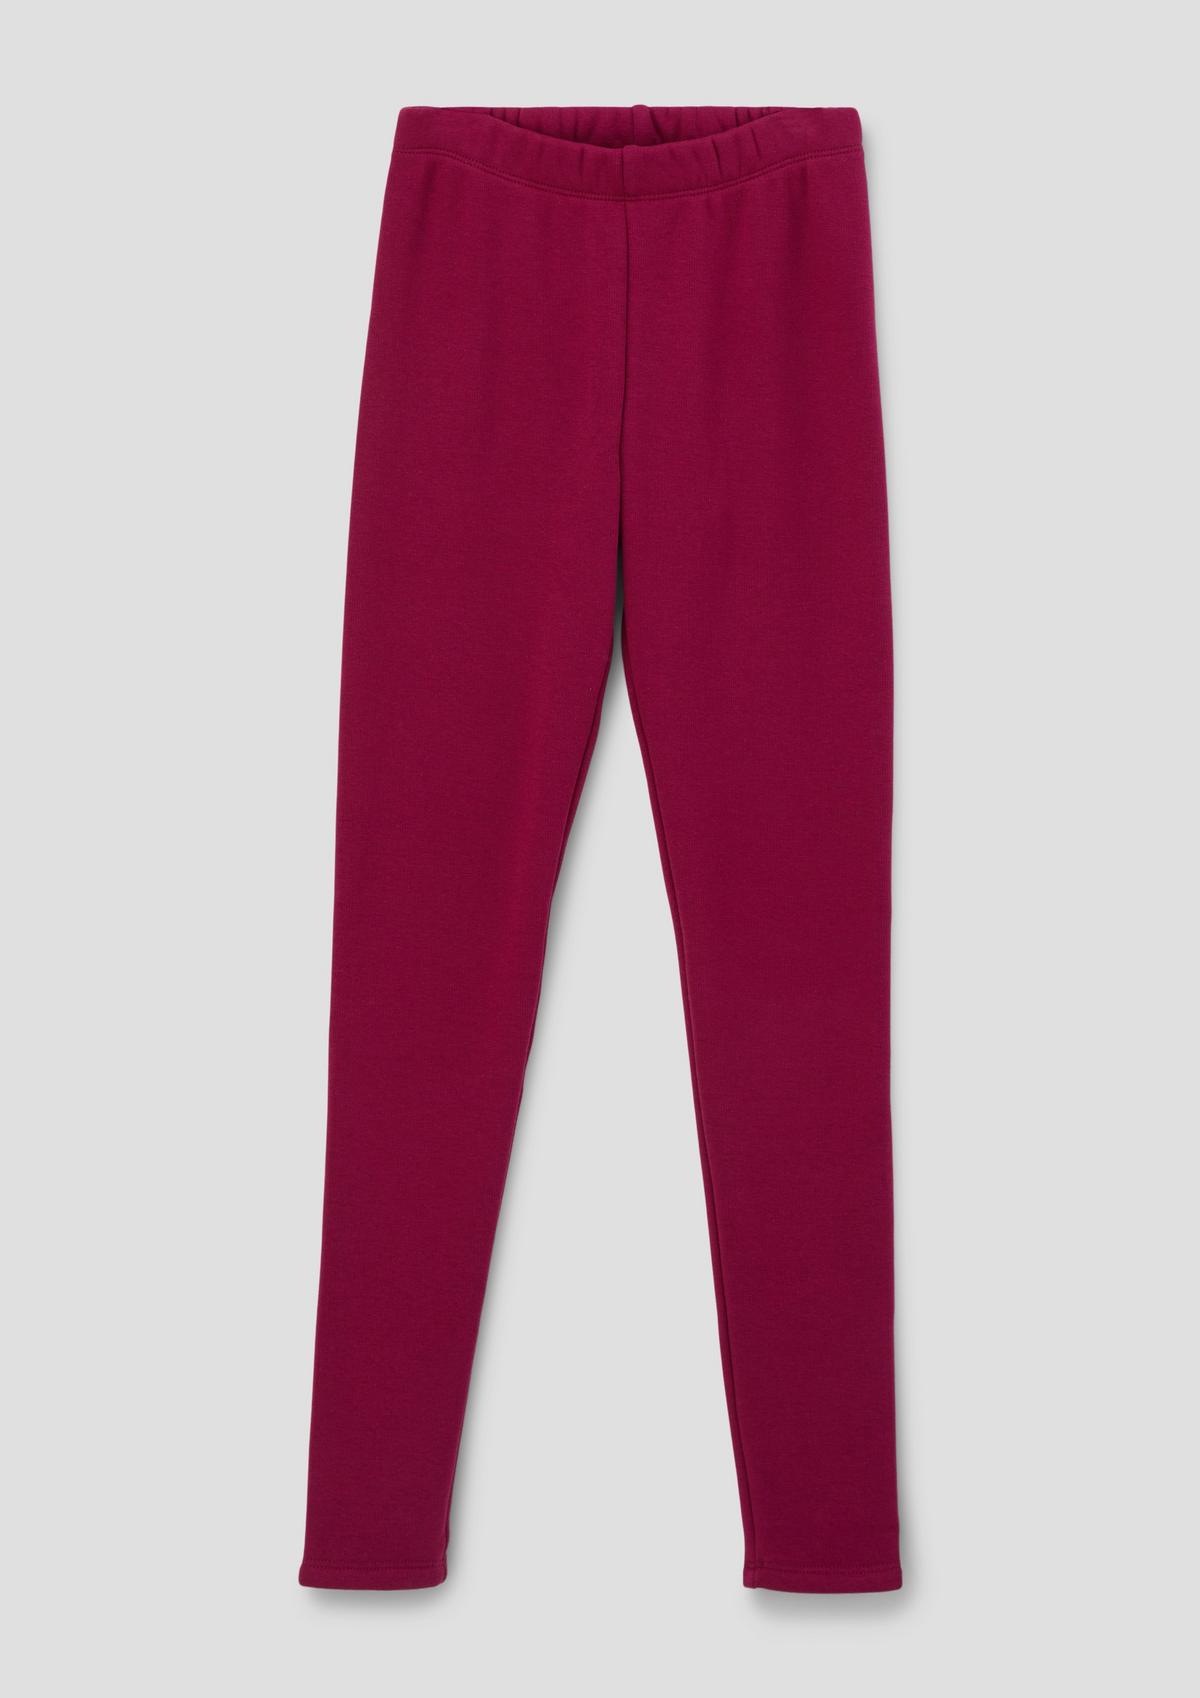 pink - fleece with Leggings lining thermo